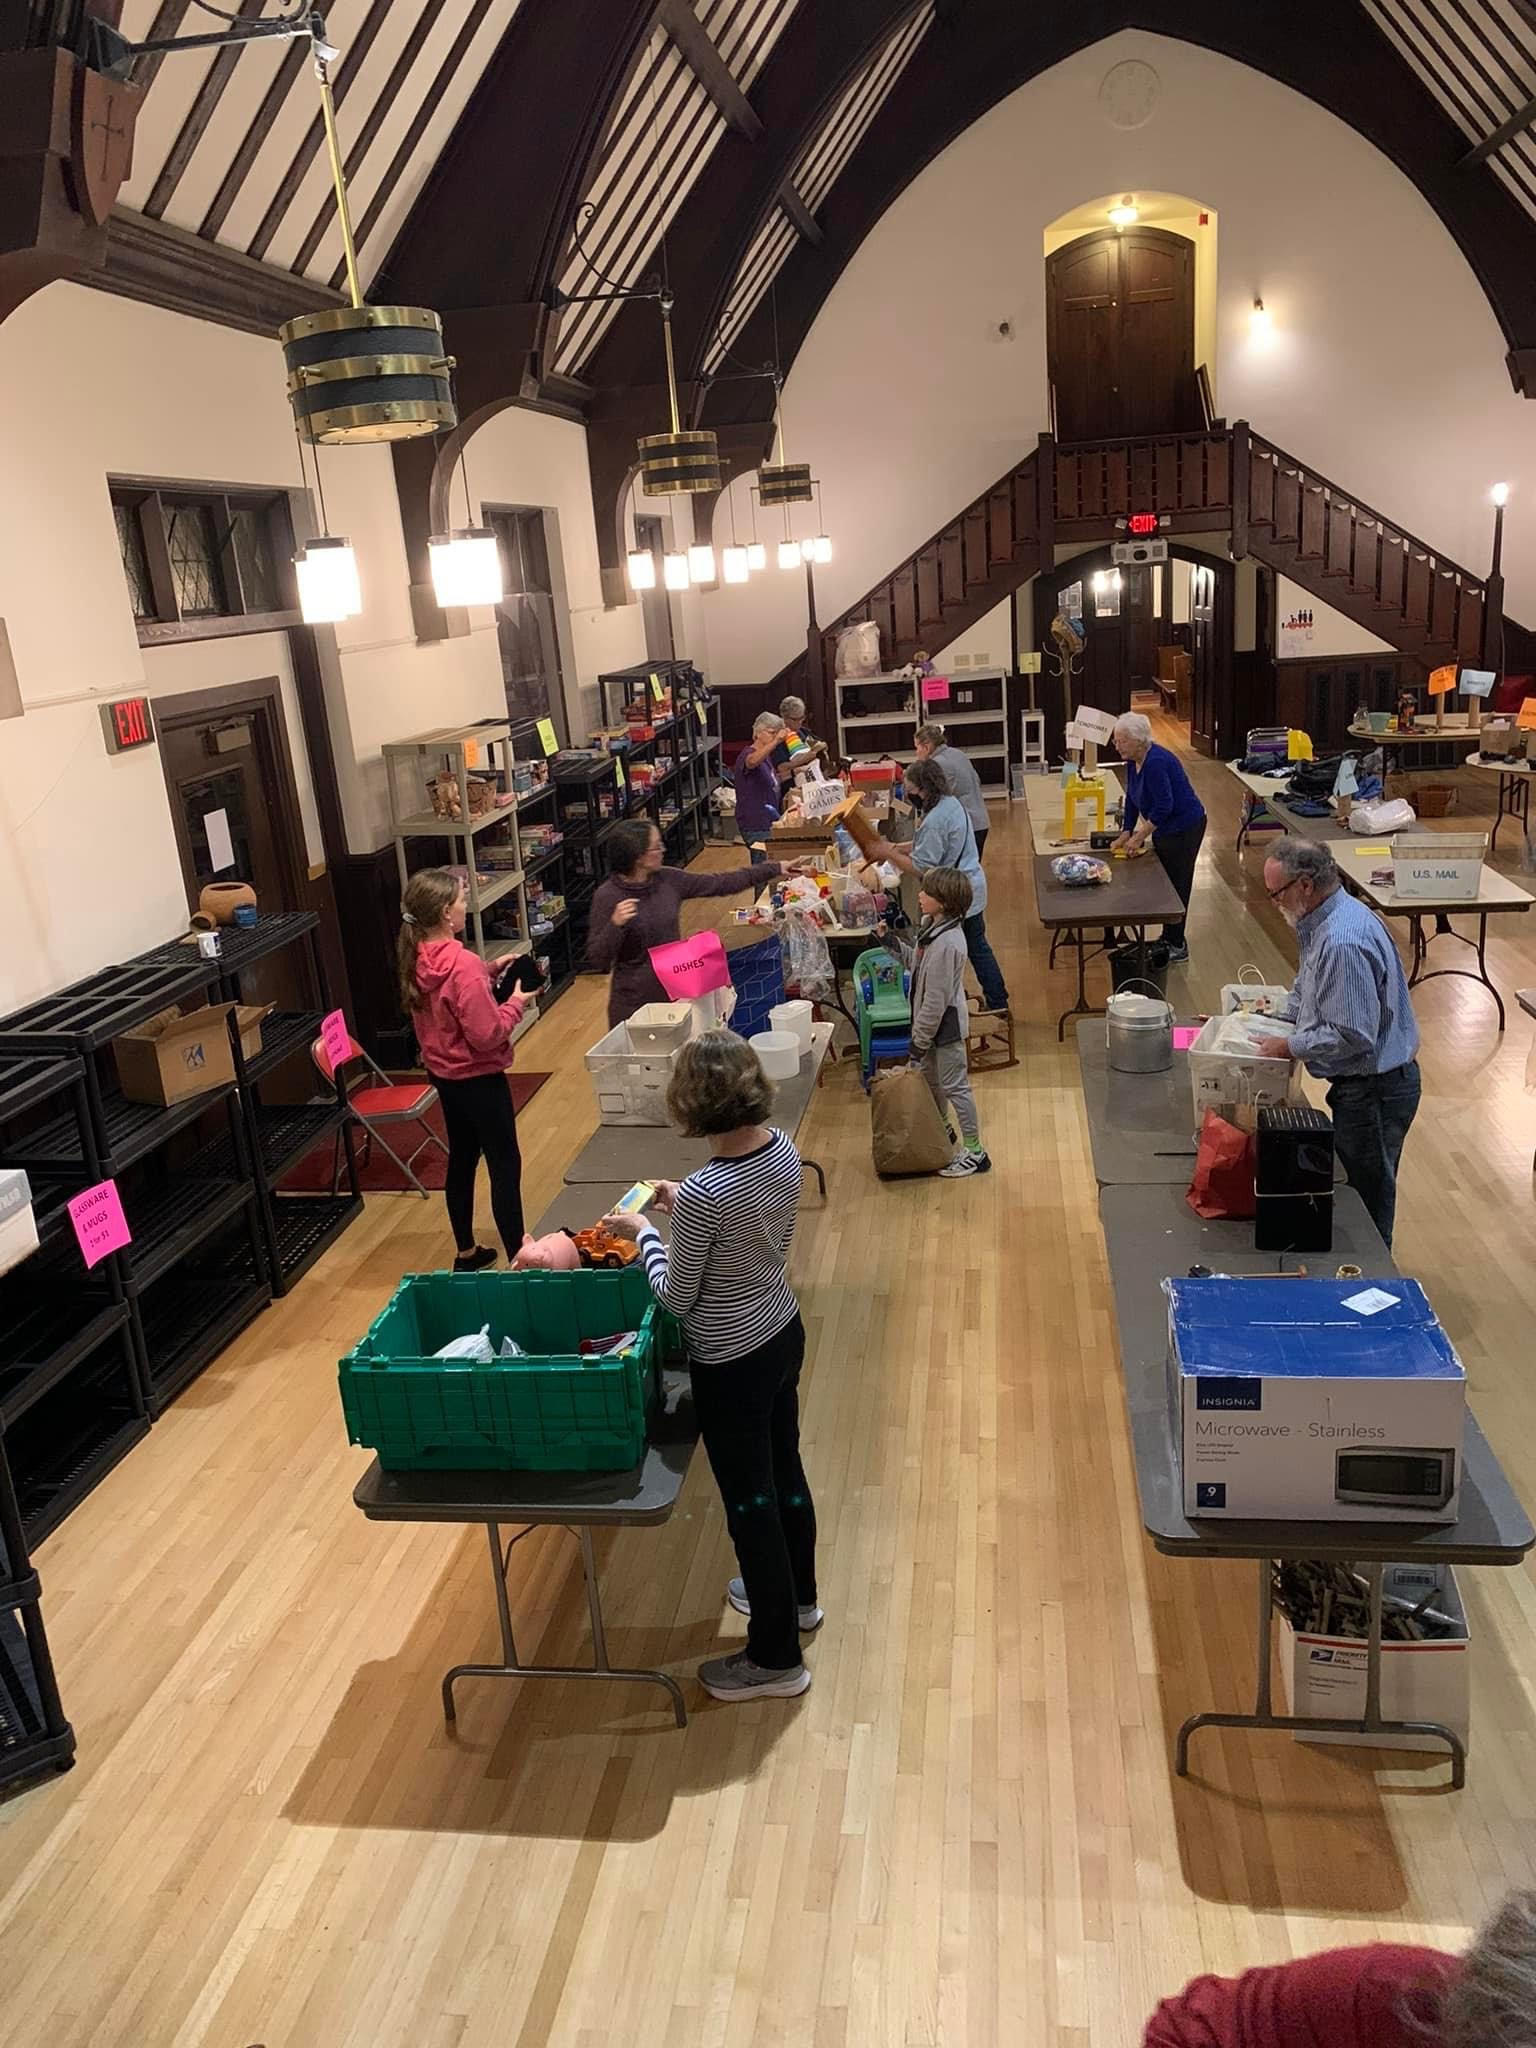 Volunteers begin setting out items on long folding tables and empty shelves in the Parish Hall.